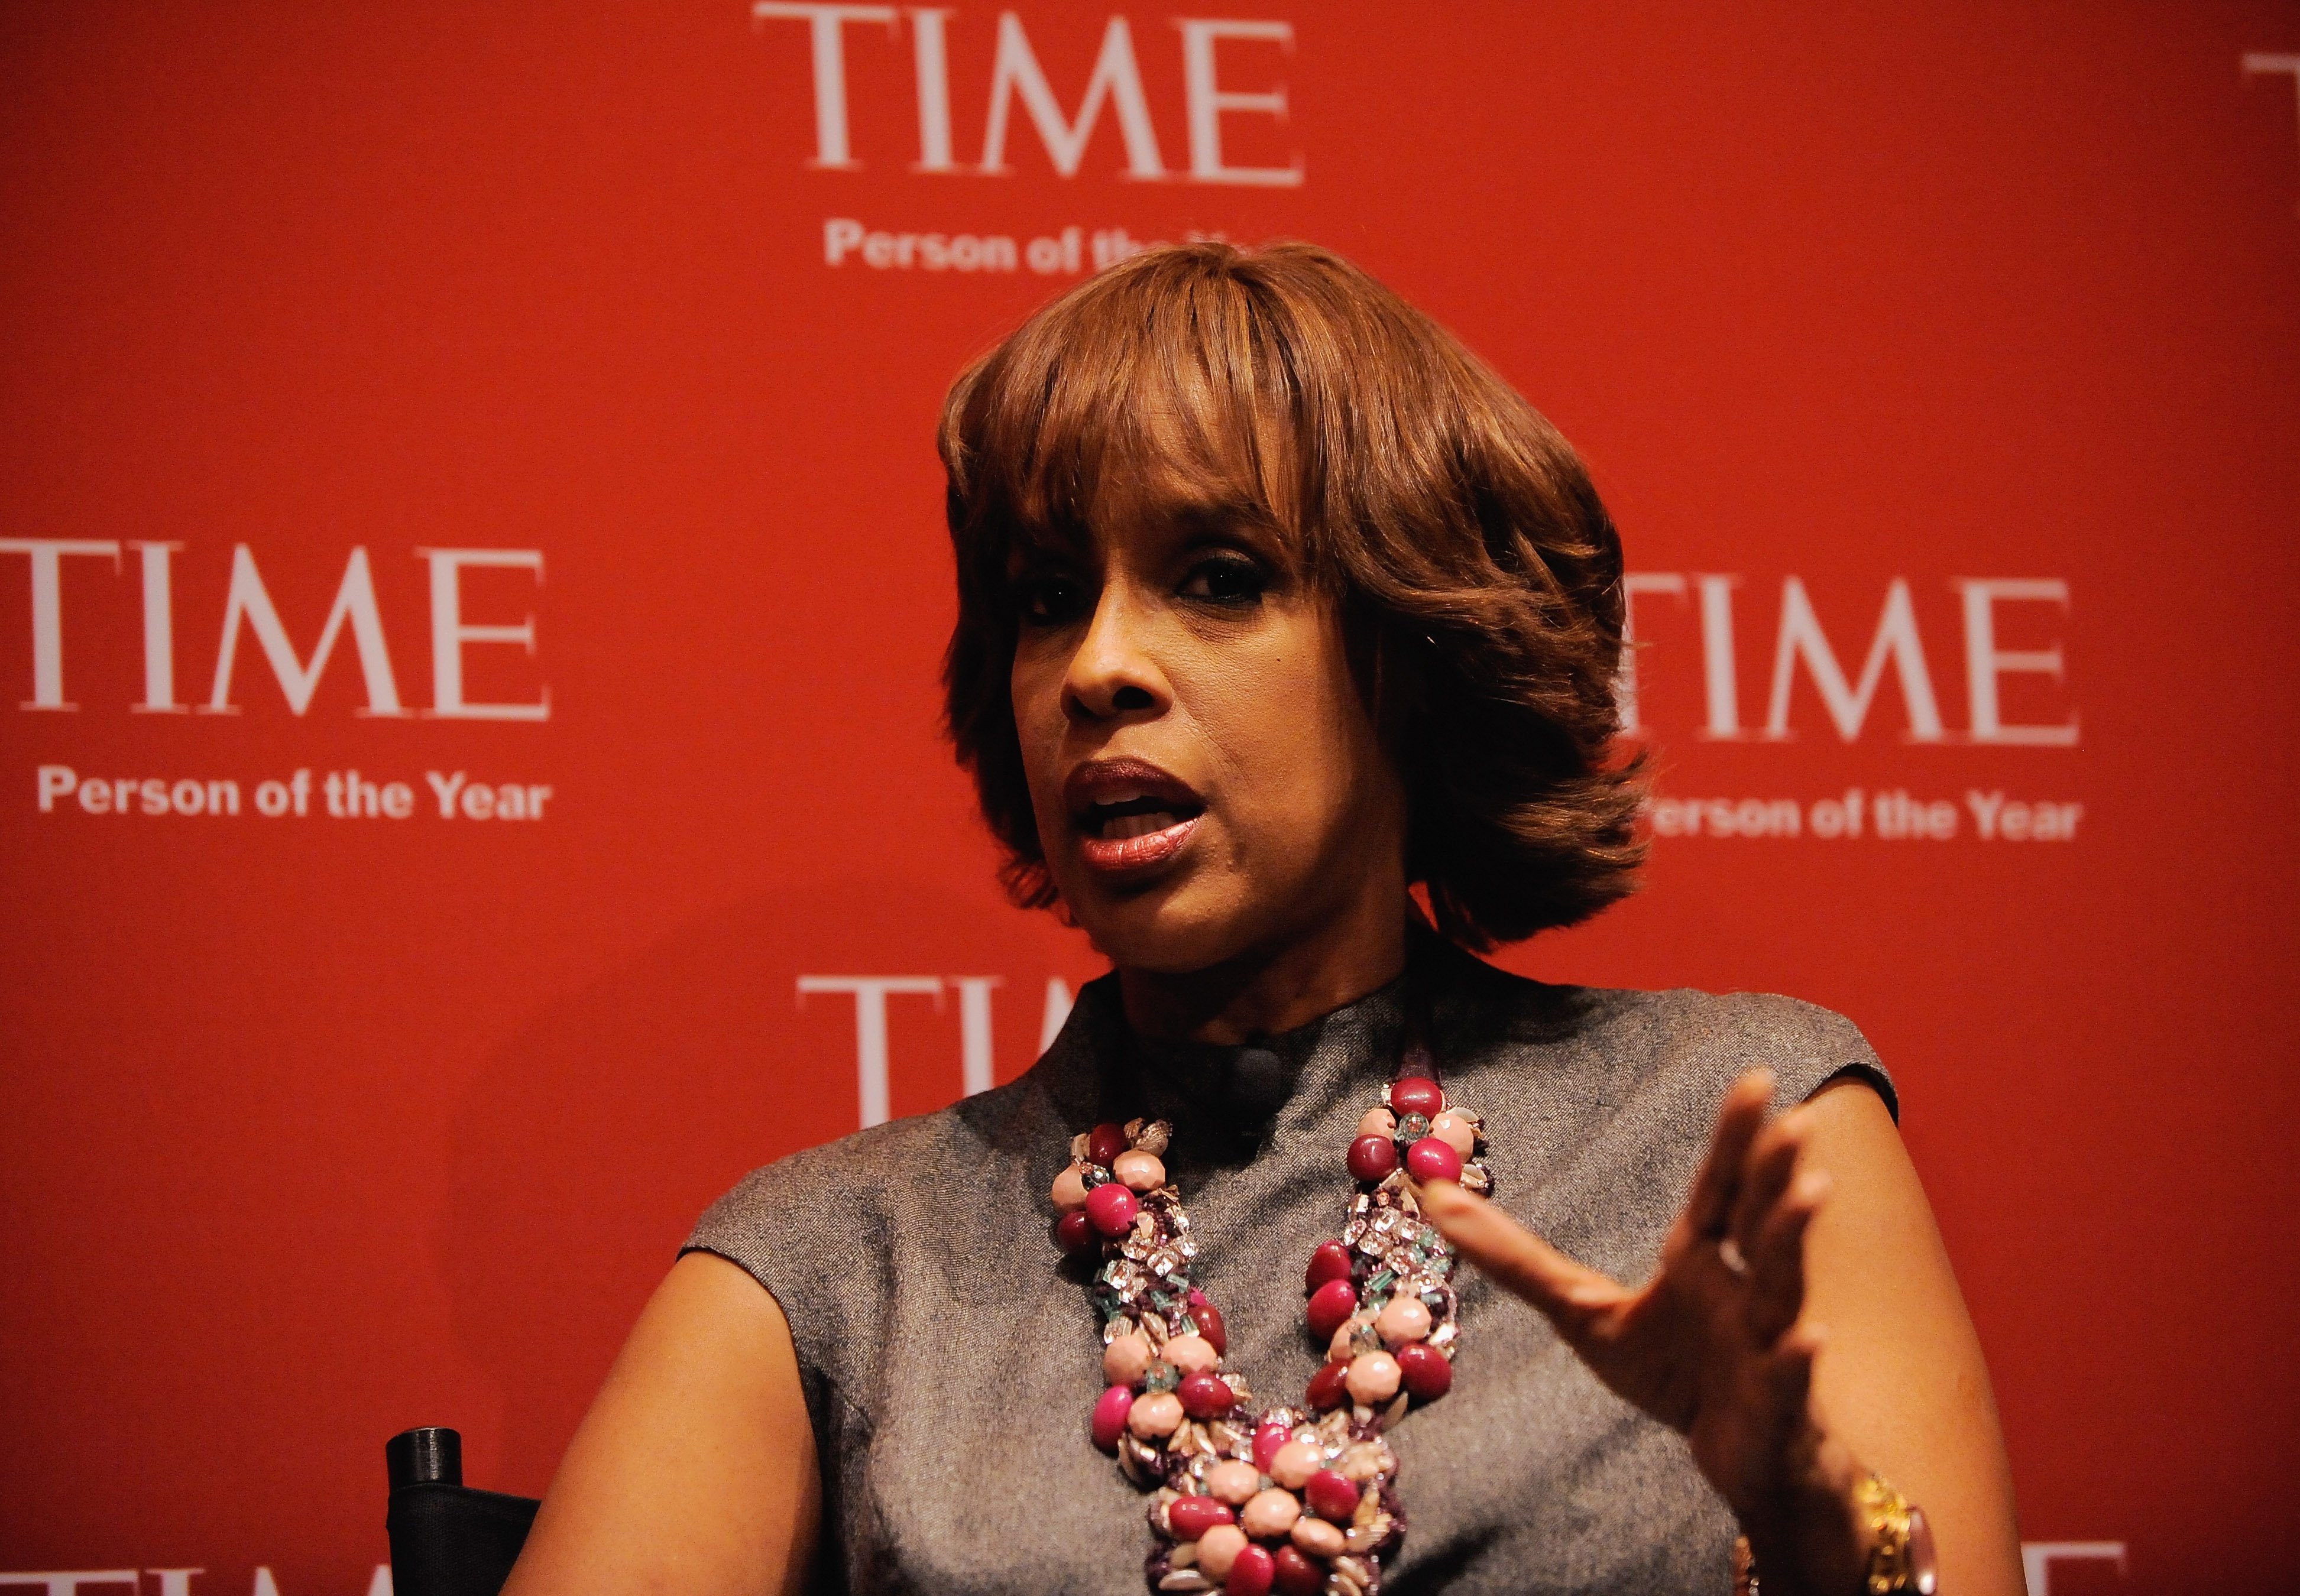 Gayle King at an event celebrating TIME's 2009 Person of the Year in November 2009 in New York. | Photo: Getty Images